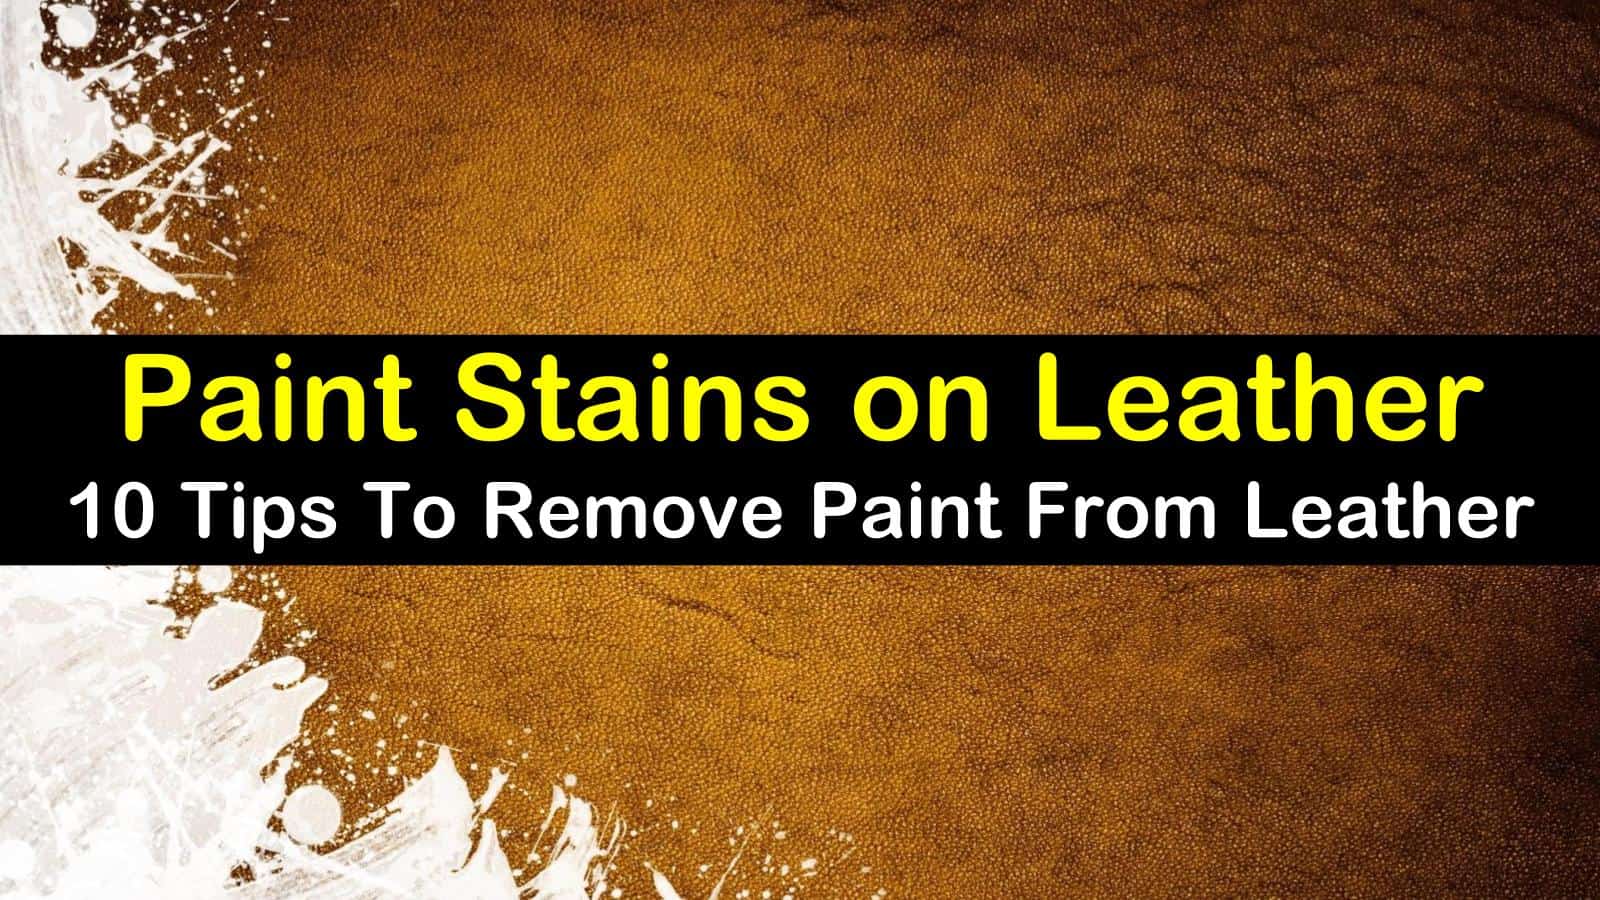 10 Fantastic Ways To Remove Paint From Leather - How To Remove Paint From Leather Car Seats